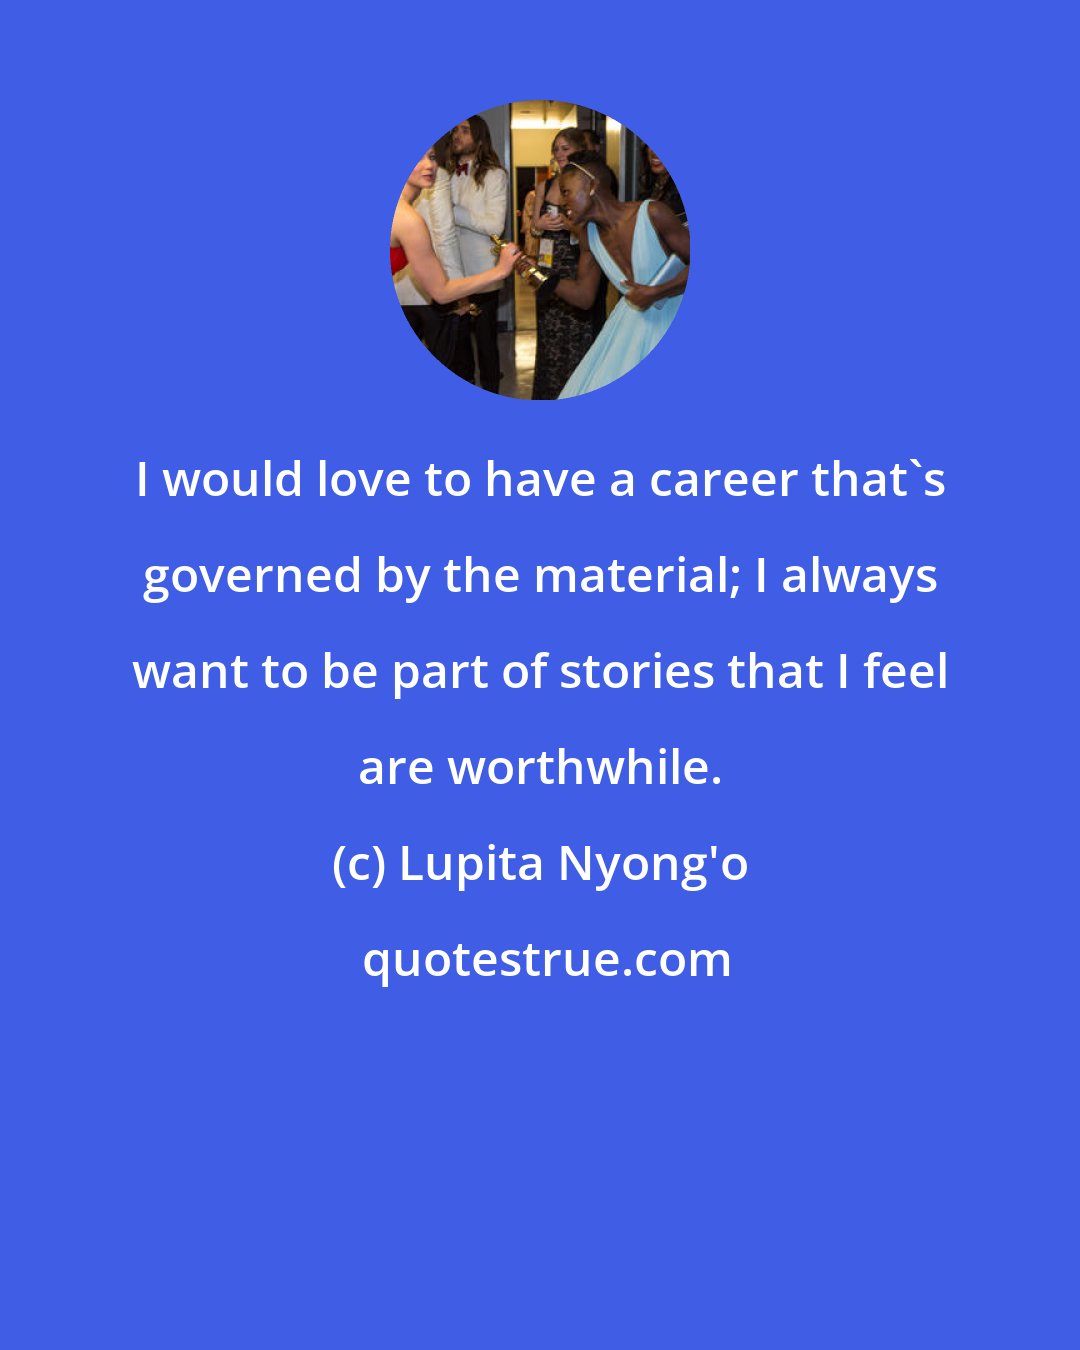 Lupita Nyong'o: I would love to have a career that's governed by the material; I always want to be part of stories that I feel are worthwhile.